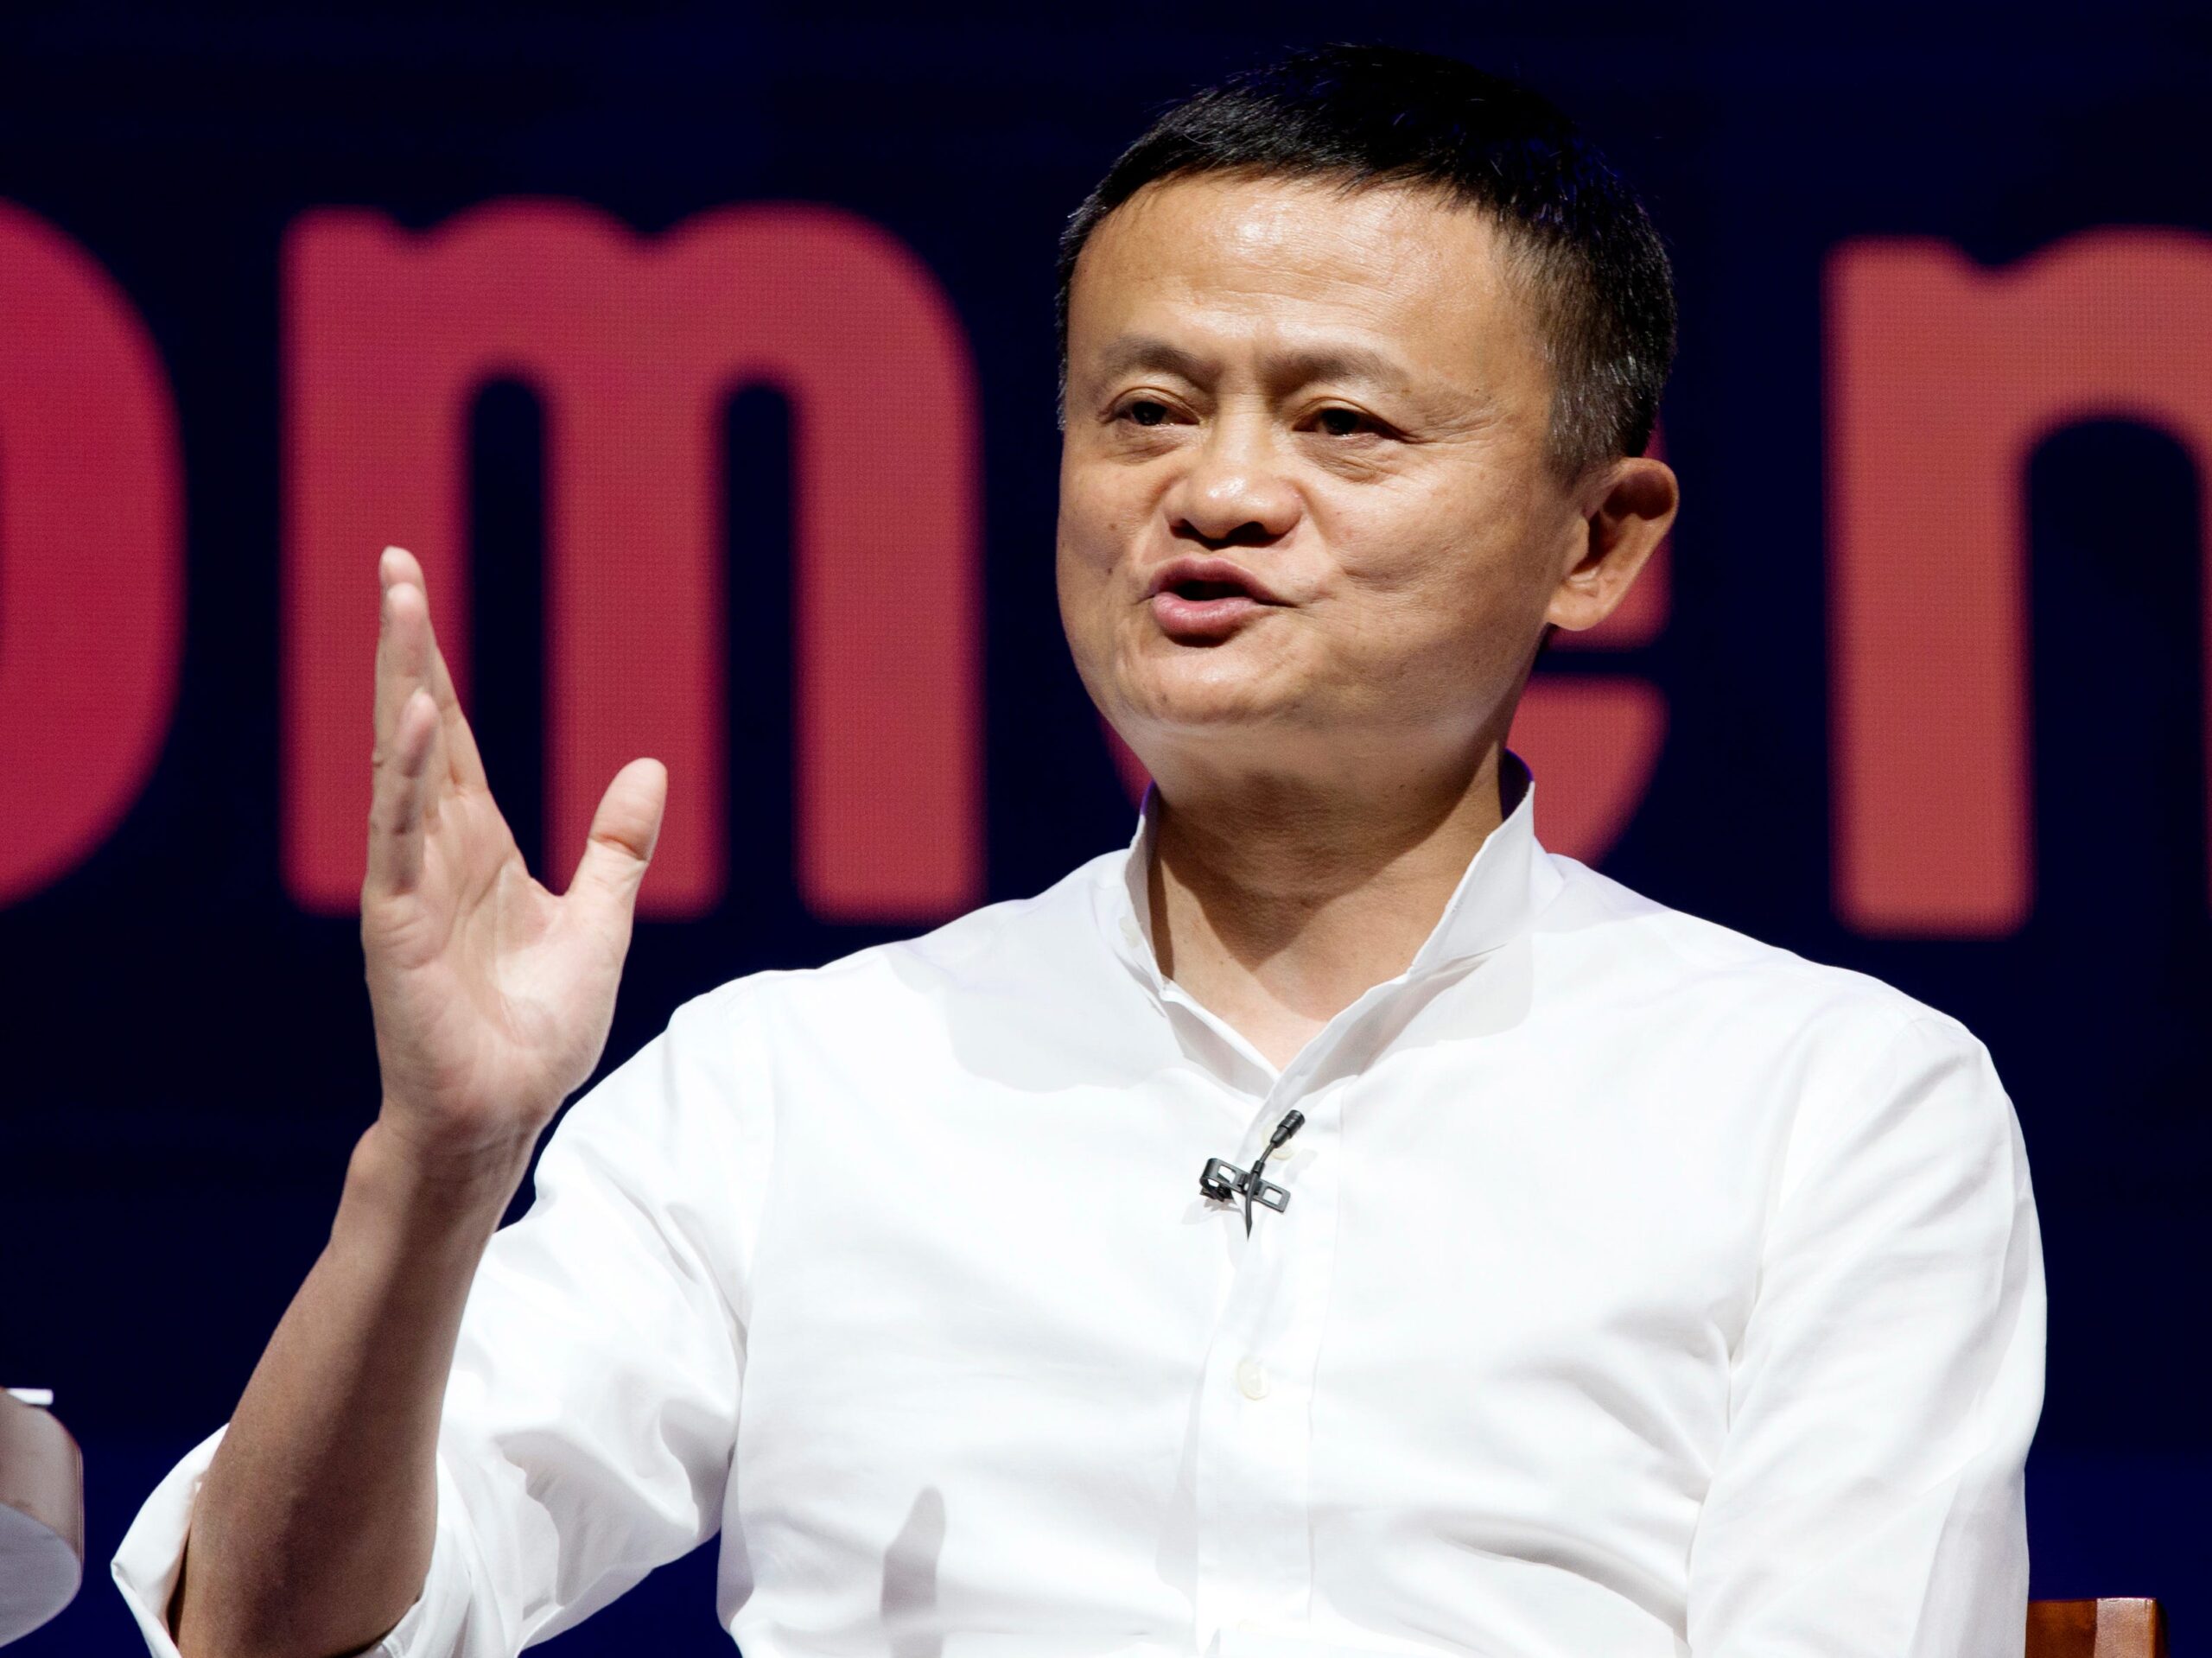 Alibaba co-founder Jack Ma has taken up a teaching position in Japan, one of the first public roles he has assumed since disappearing from the spotlig